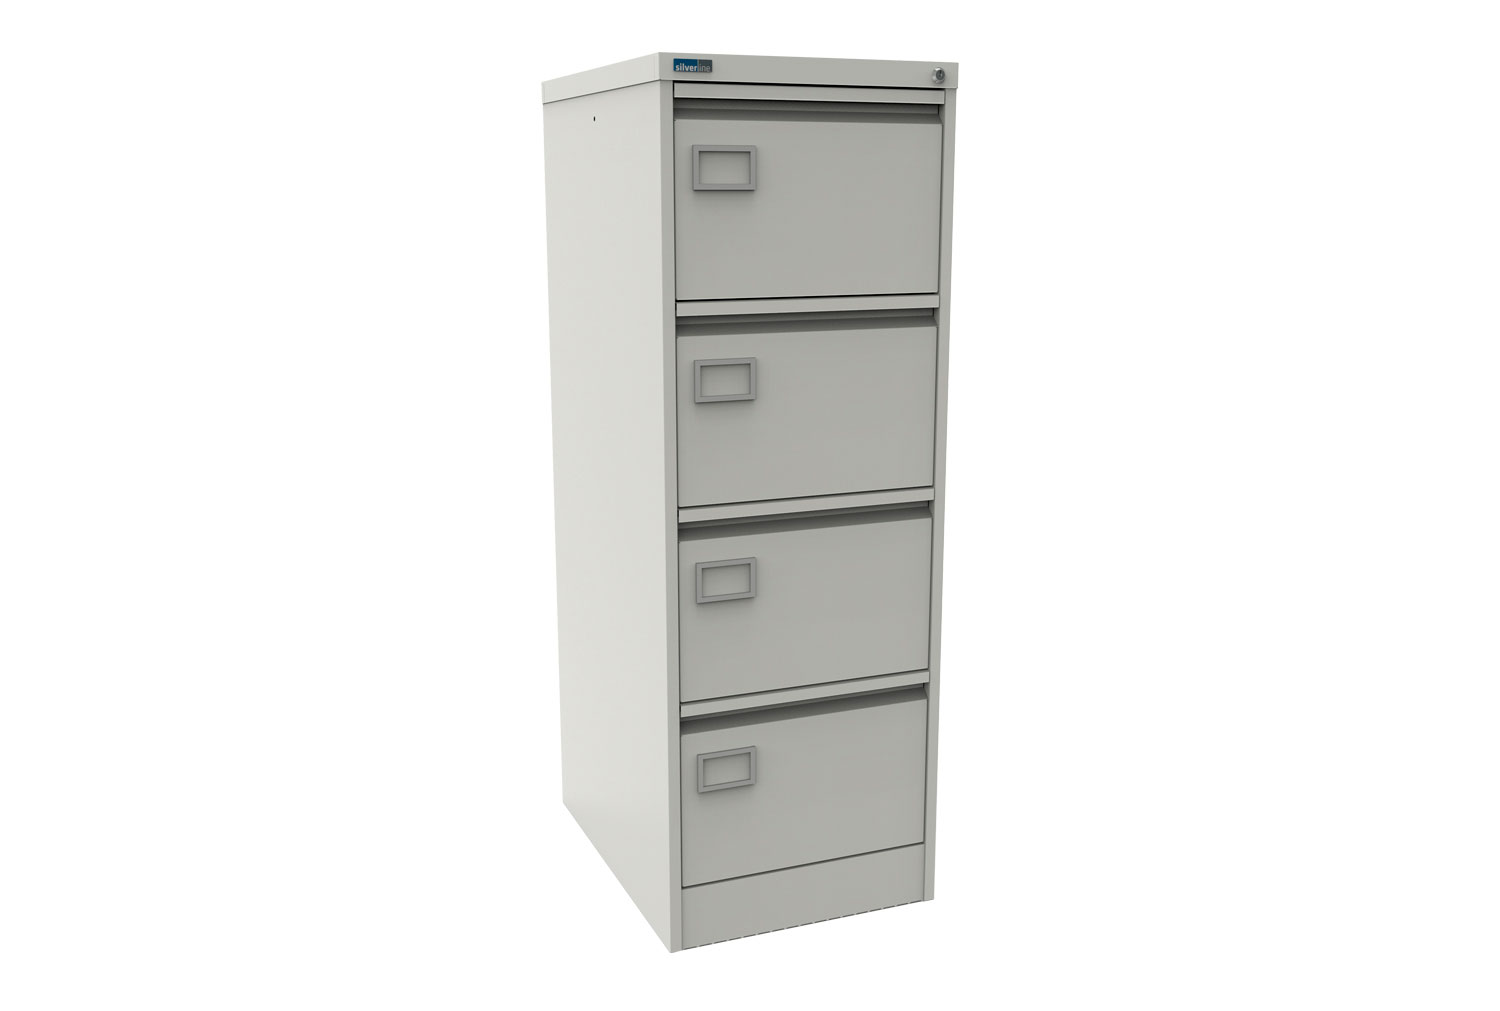 Silverline Executive 4 Drawer Filing Cabinets, 4 Drawer - 40wx62dx132h (cm), White Semi Gloss